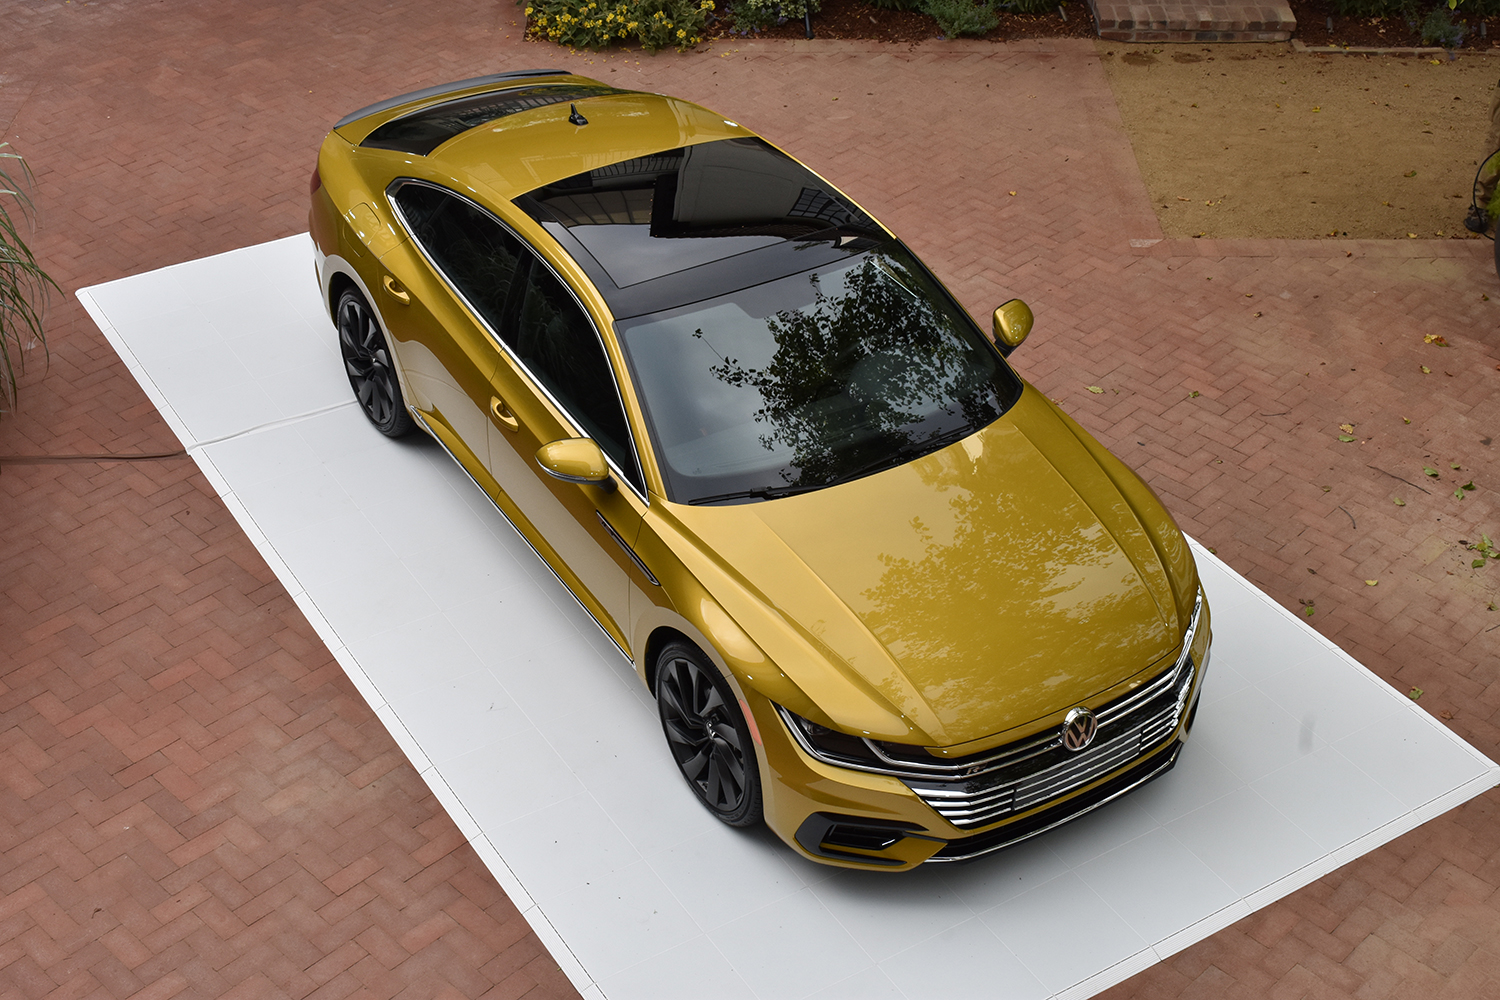 2019 Volkswagen Arteon First Drive Review: Style Without Compromise